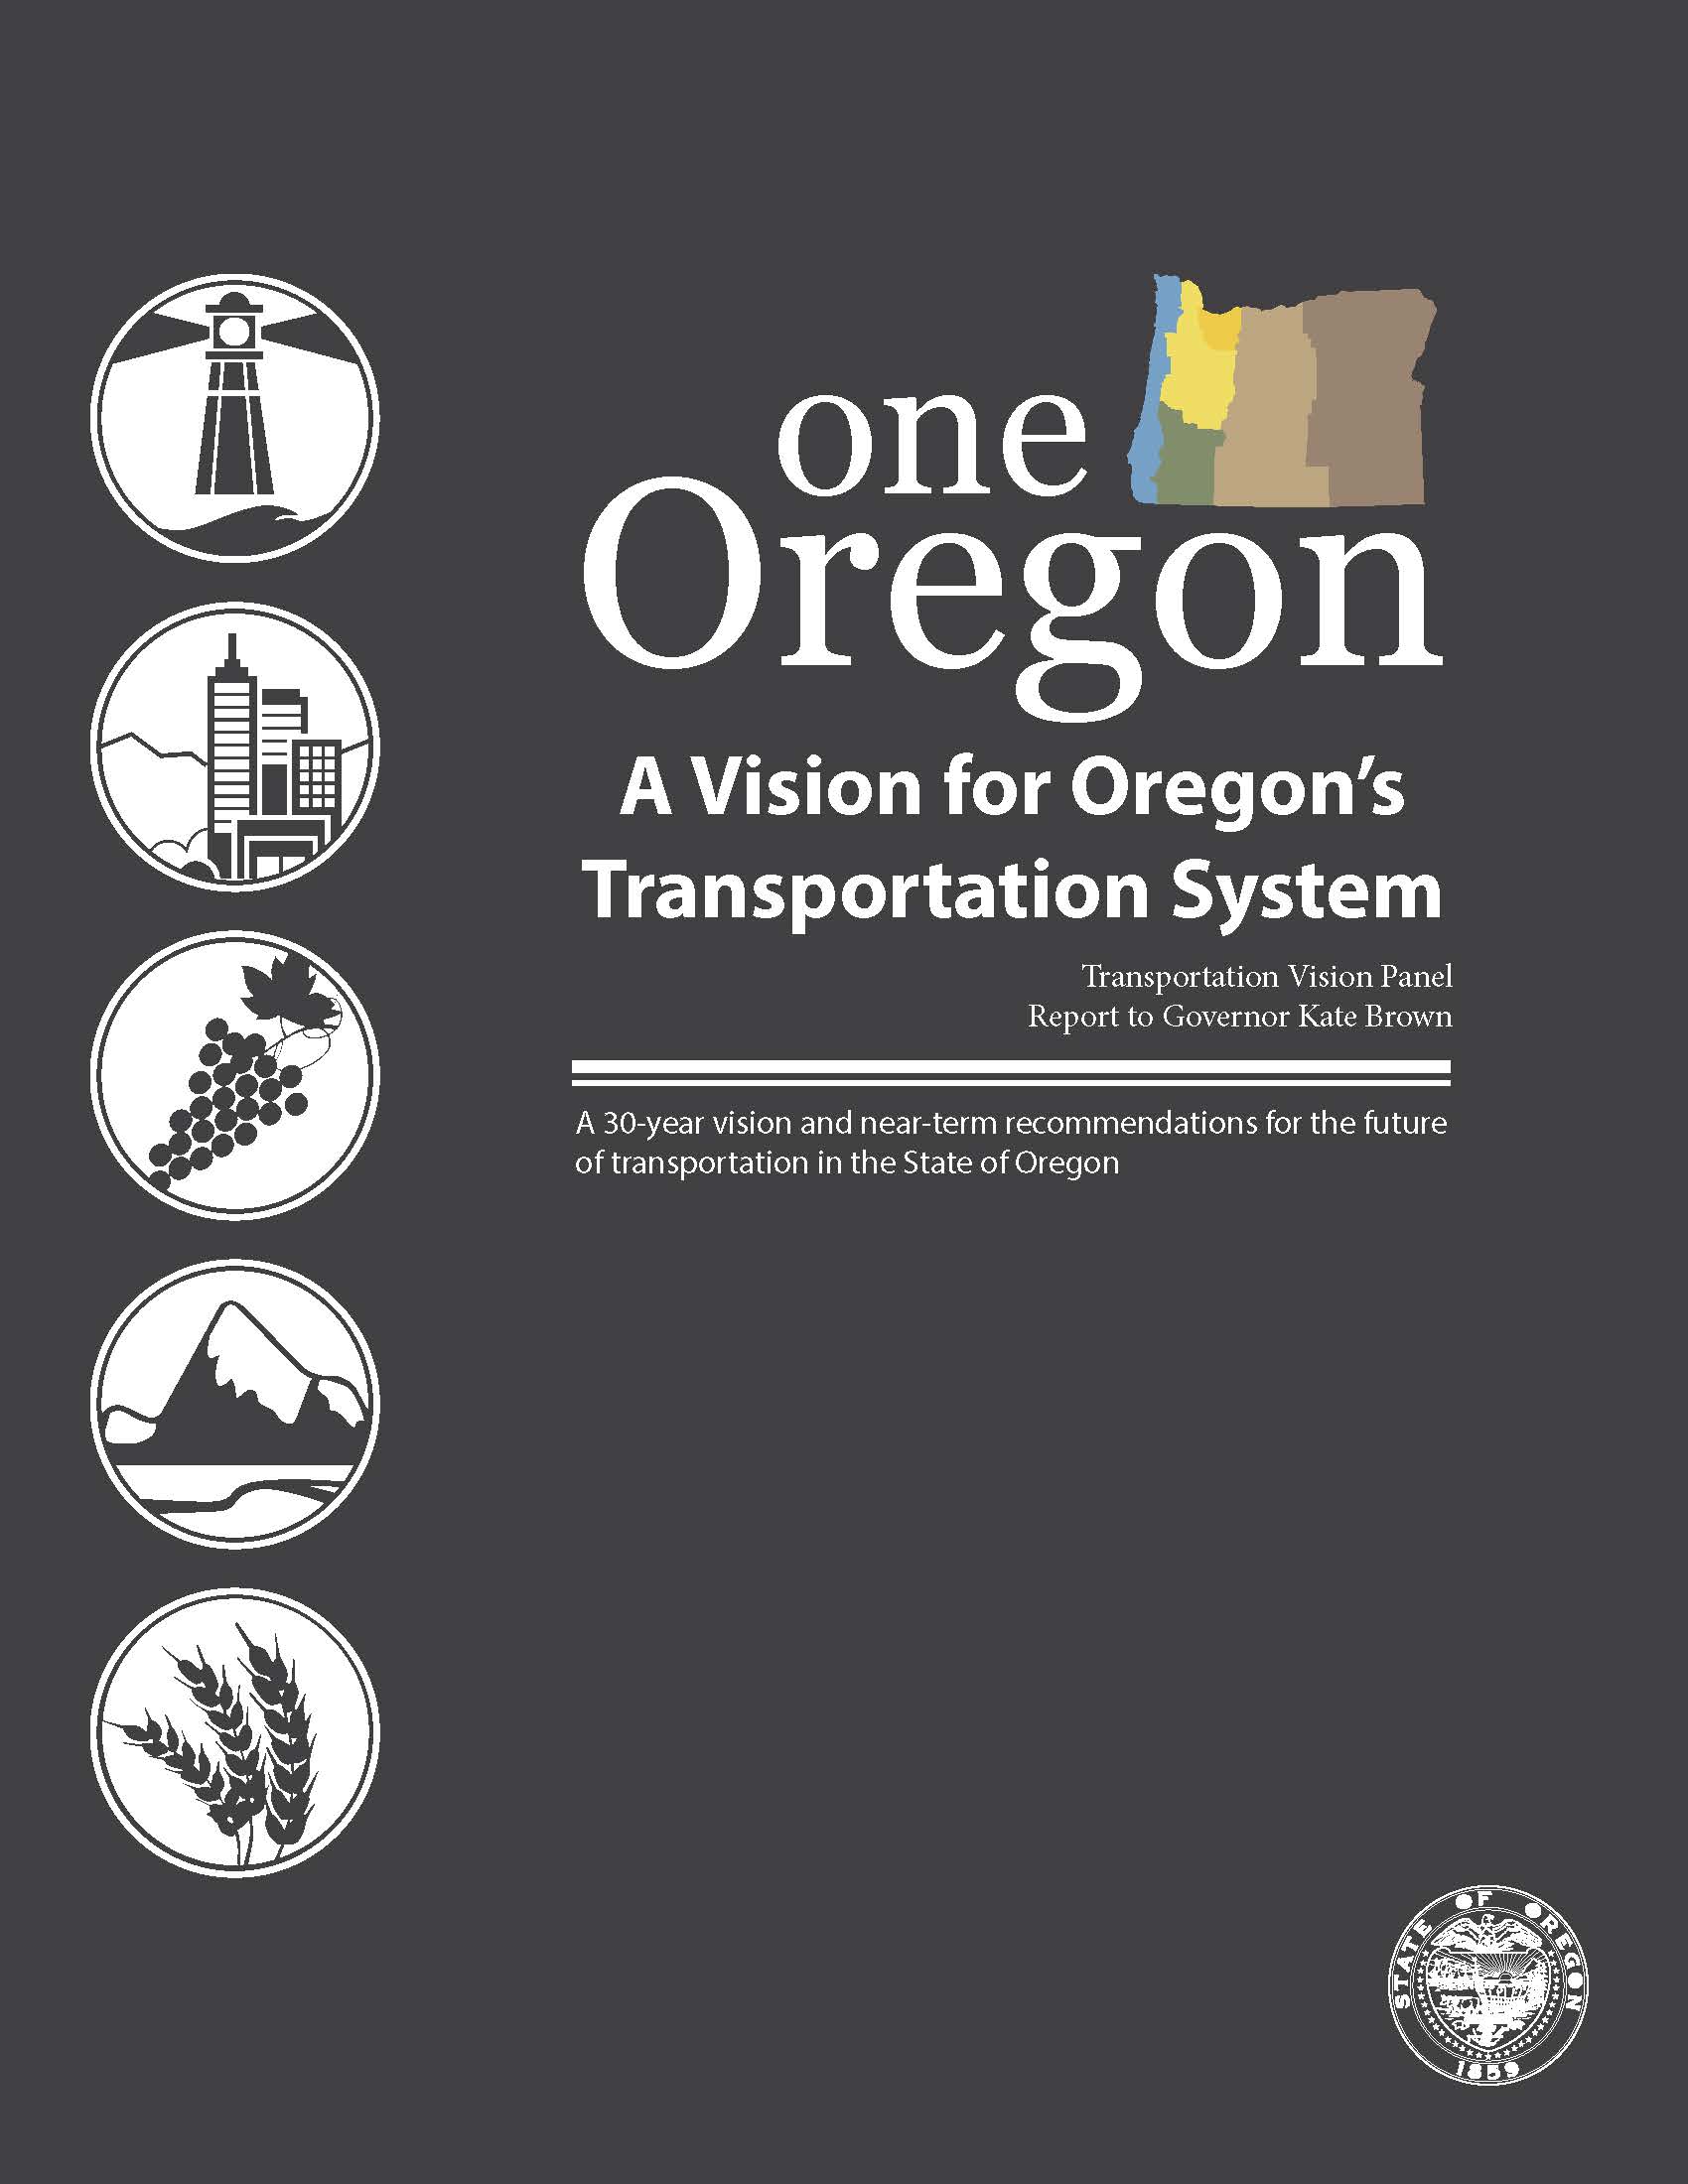 How long are the governor's terms in Oregon?